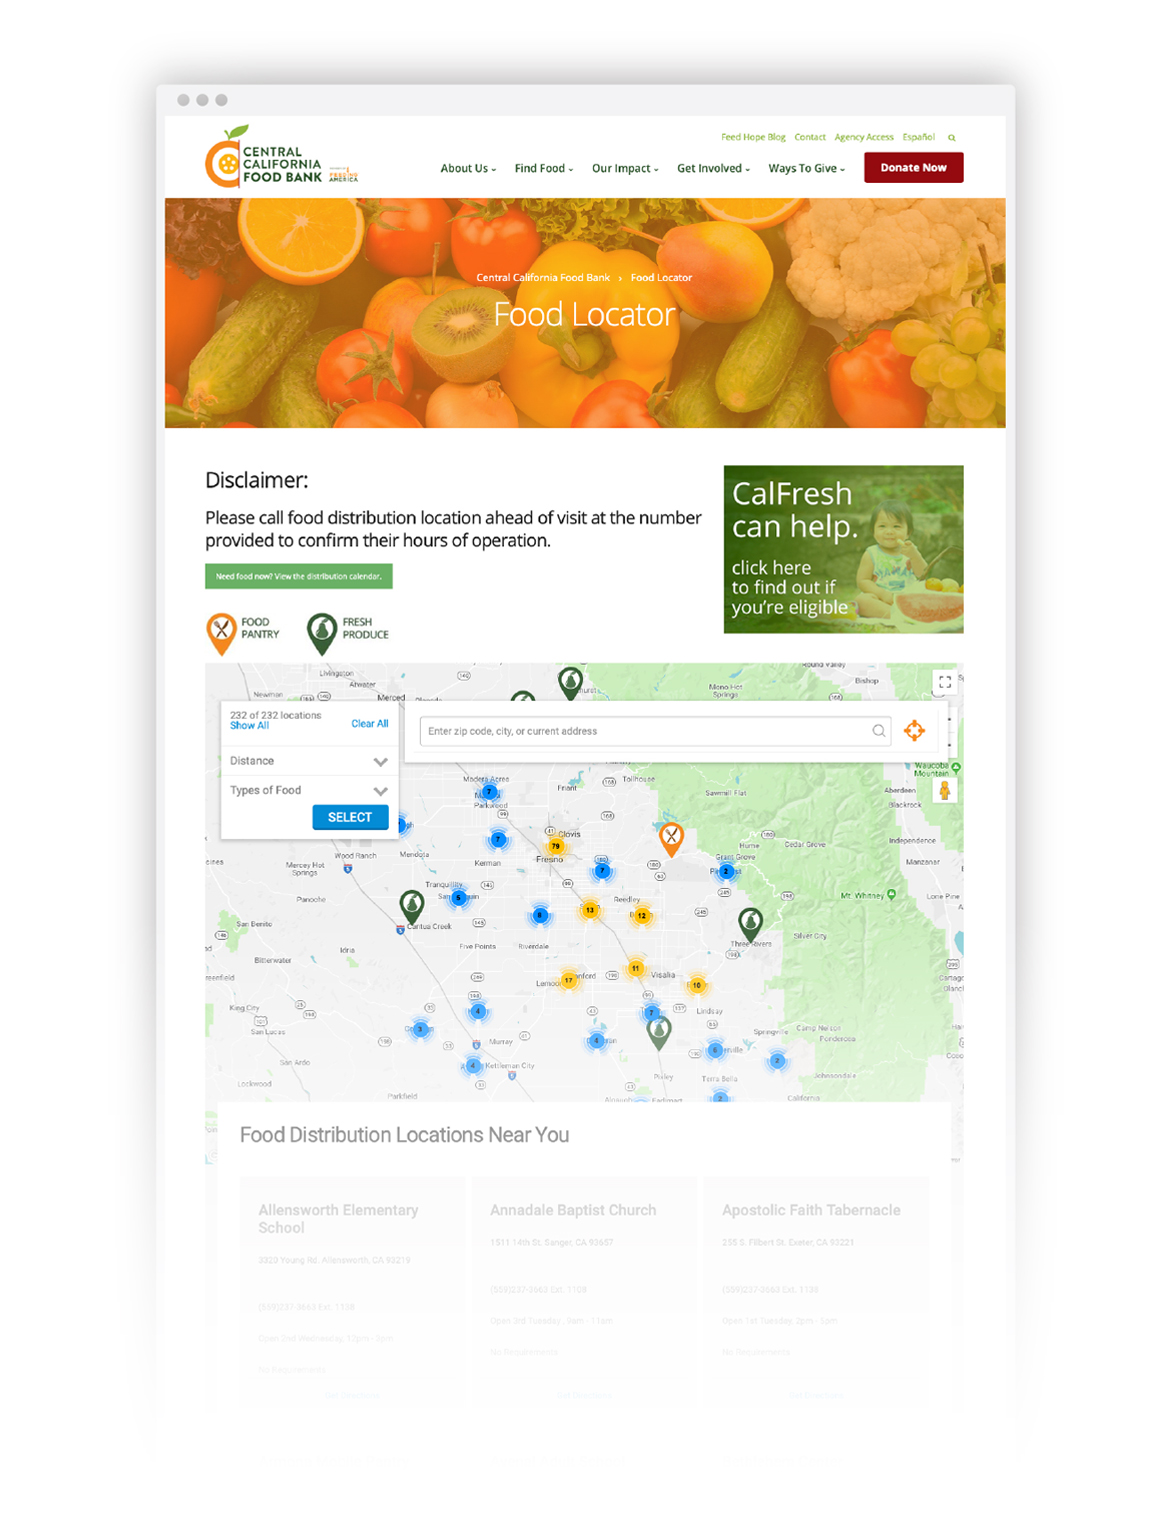 The tool on Central California Food Bank's website which allows users to easily find an open distribution center near them.